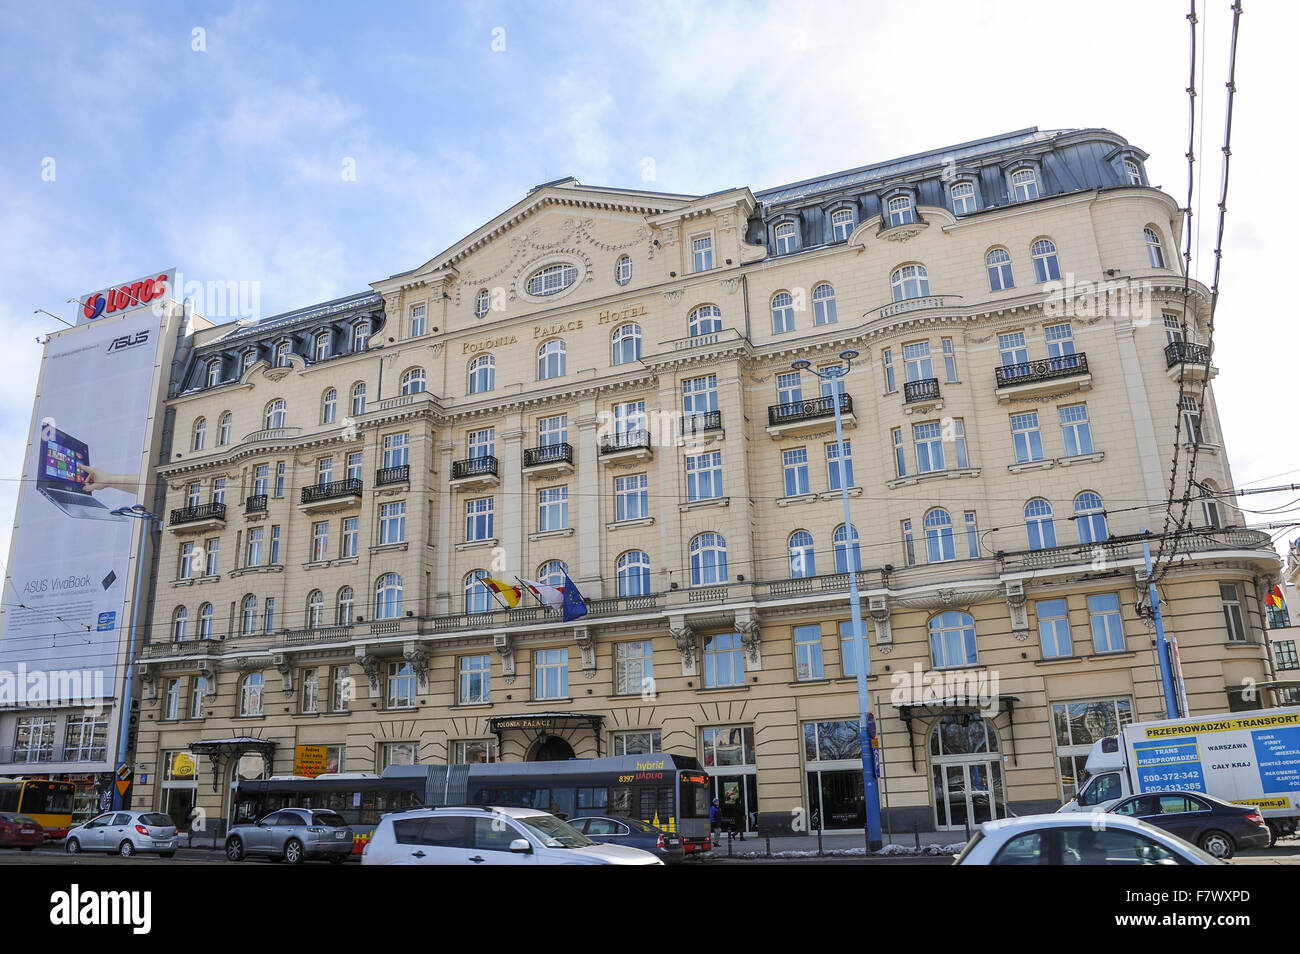 Hotel Polonia High Resolution Stock Photography and Images - Alamy